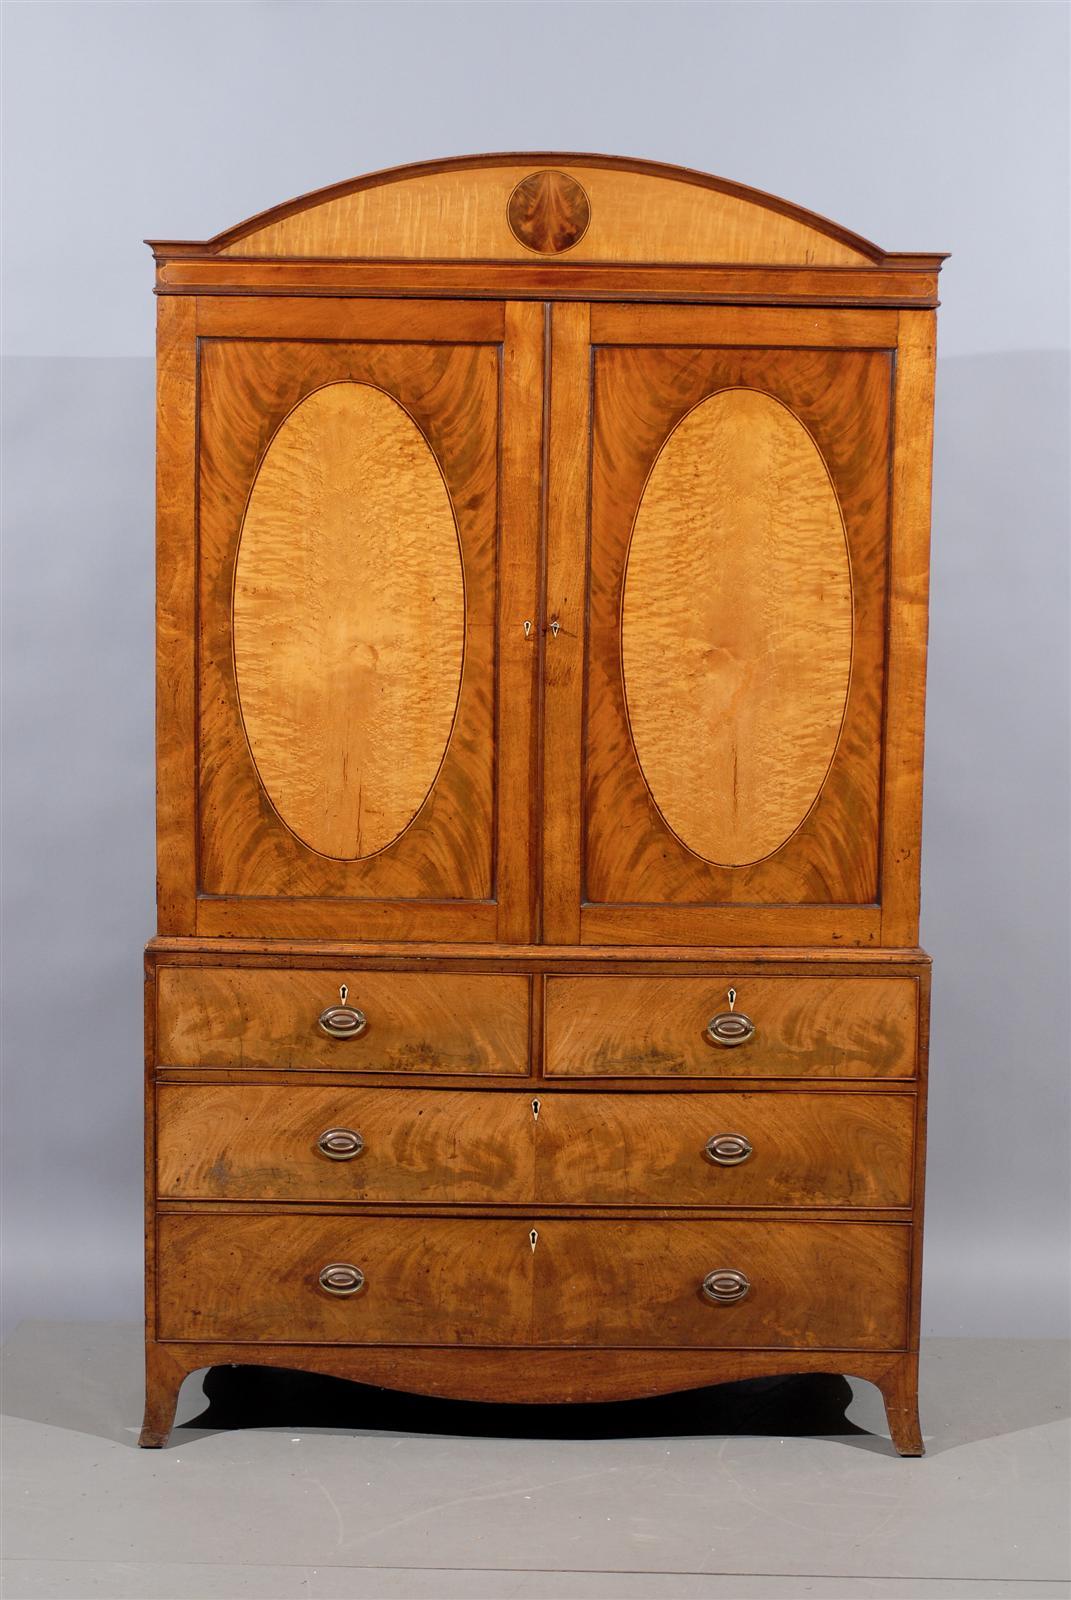 A George III English linen press in mahogany with satinwood arched cornice and oval veneered doors with interior shelf . The lower section with four sliding drawers, shaped apron and splayed feet. 

William Word Fine Antiques: Atlanta's source for